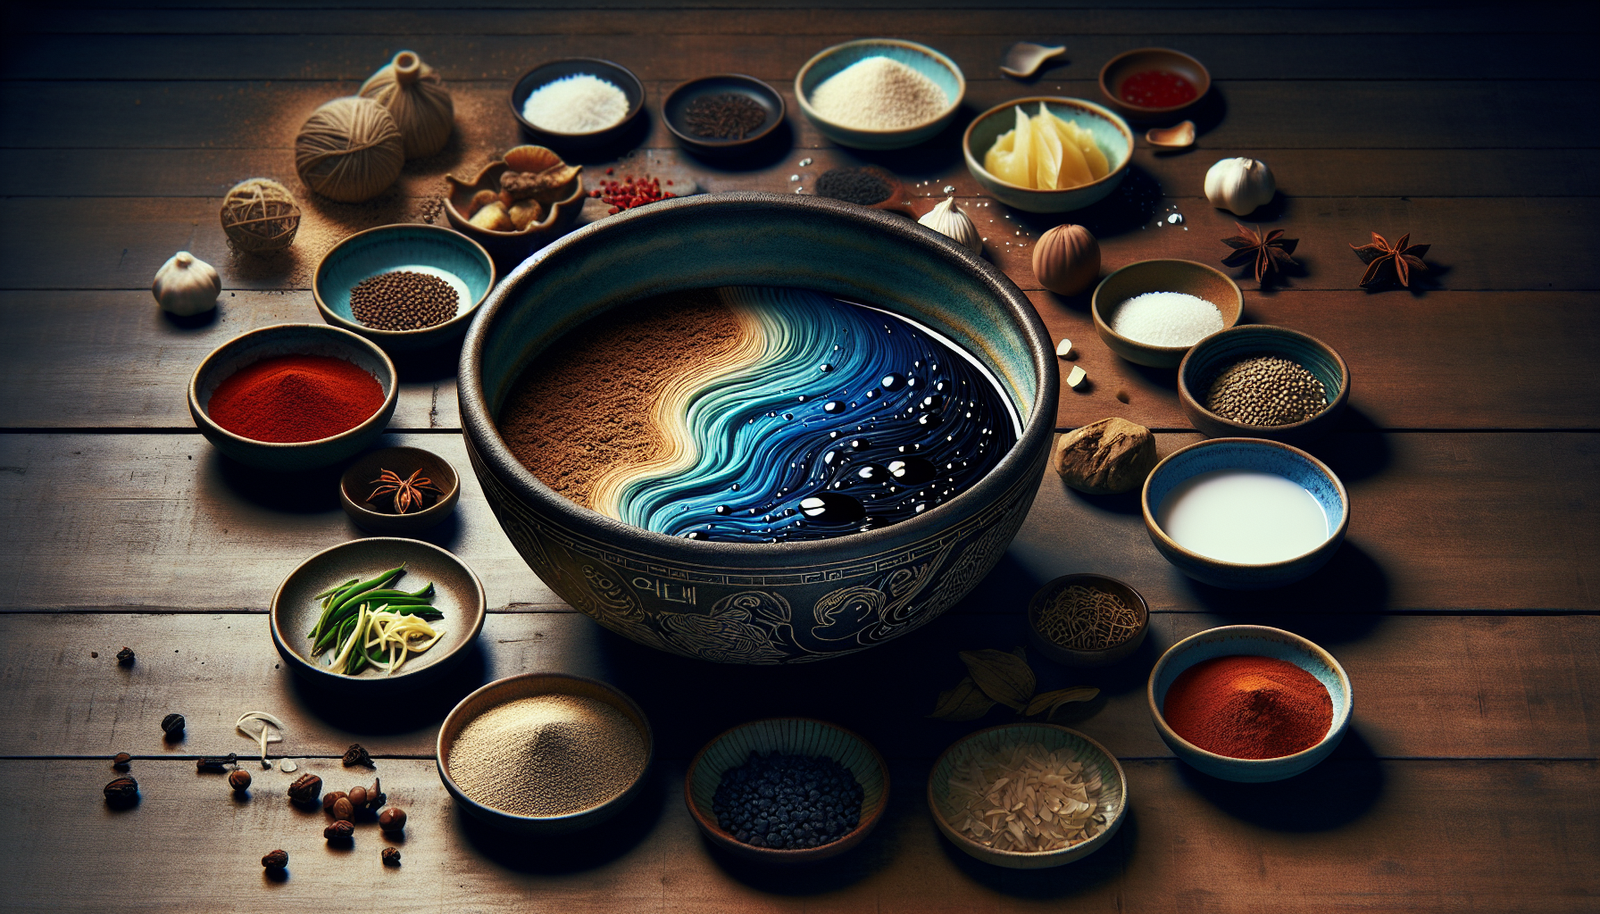 How Has The Concept Of han Influenced Korean Cooking?